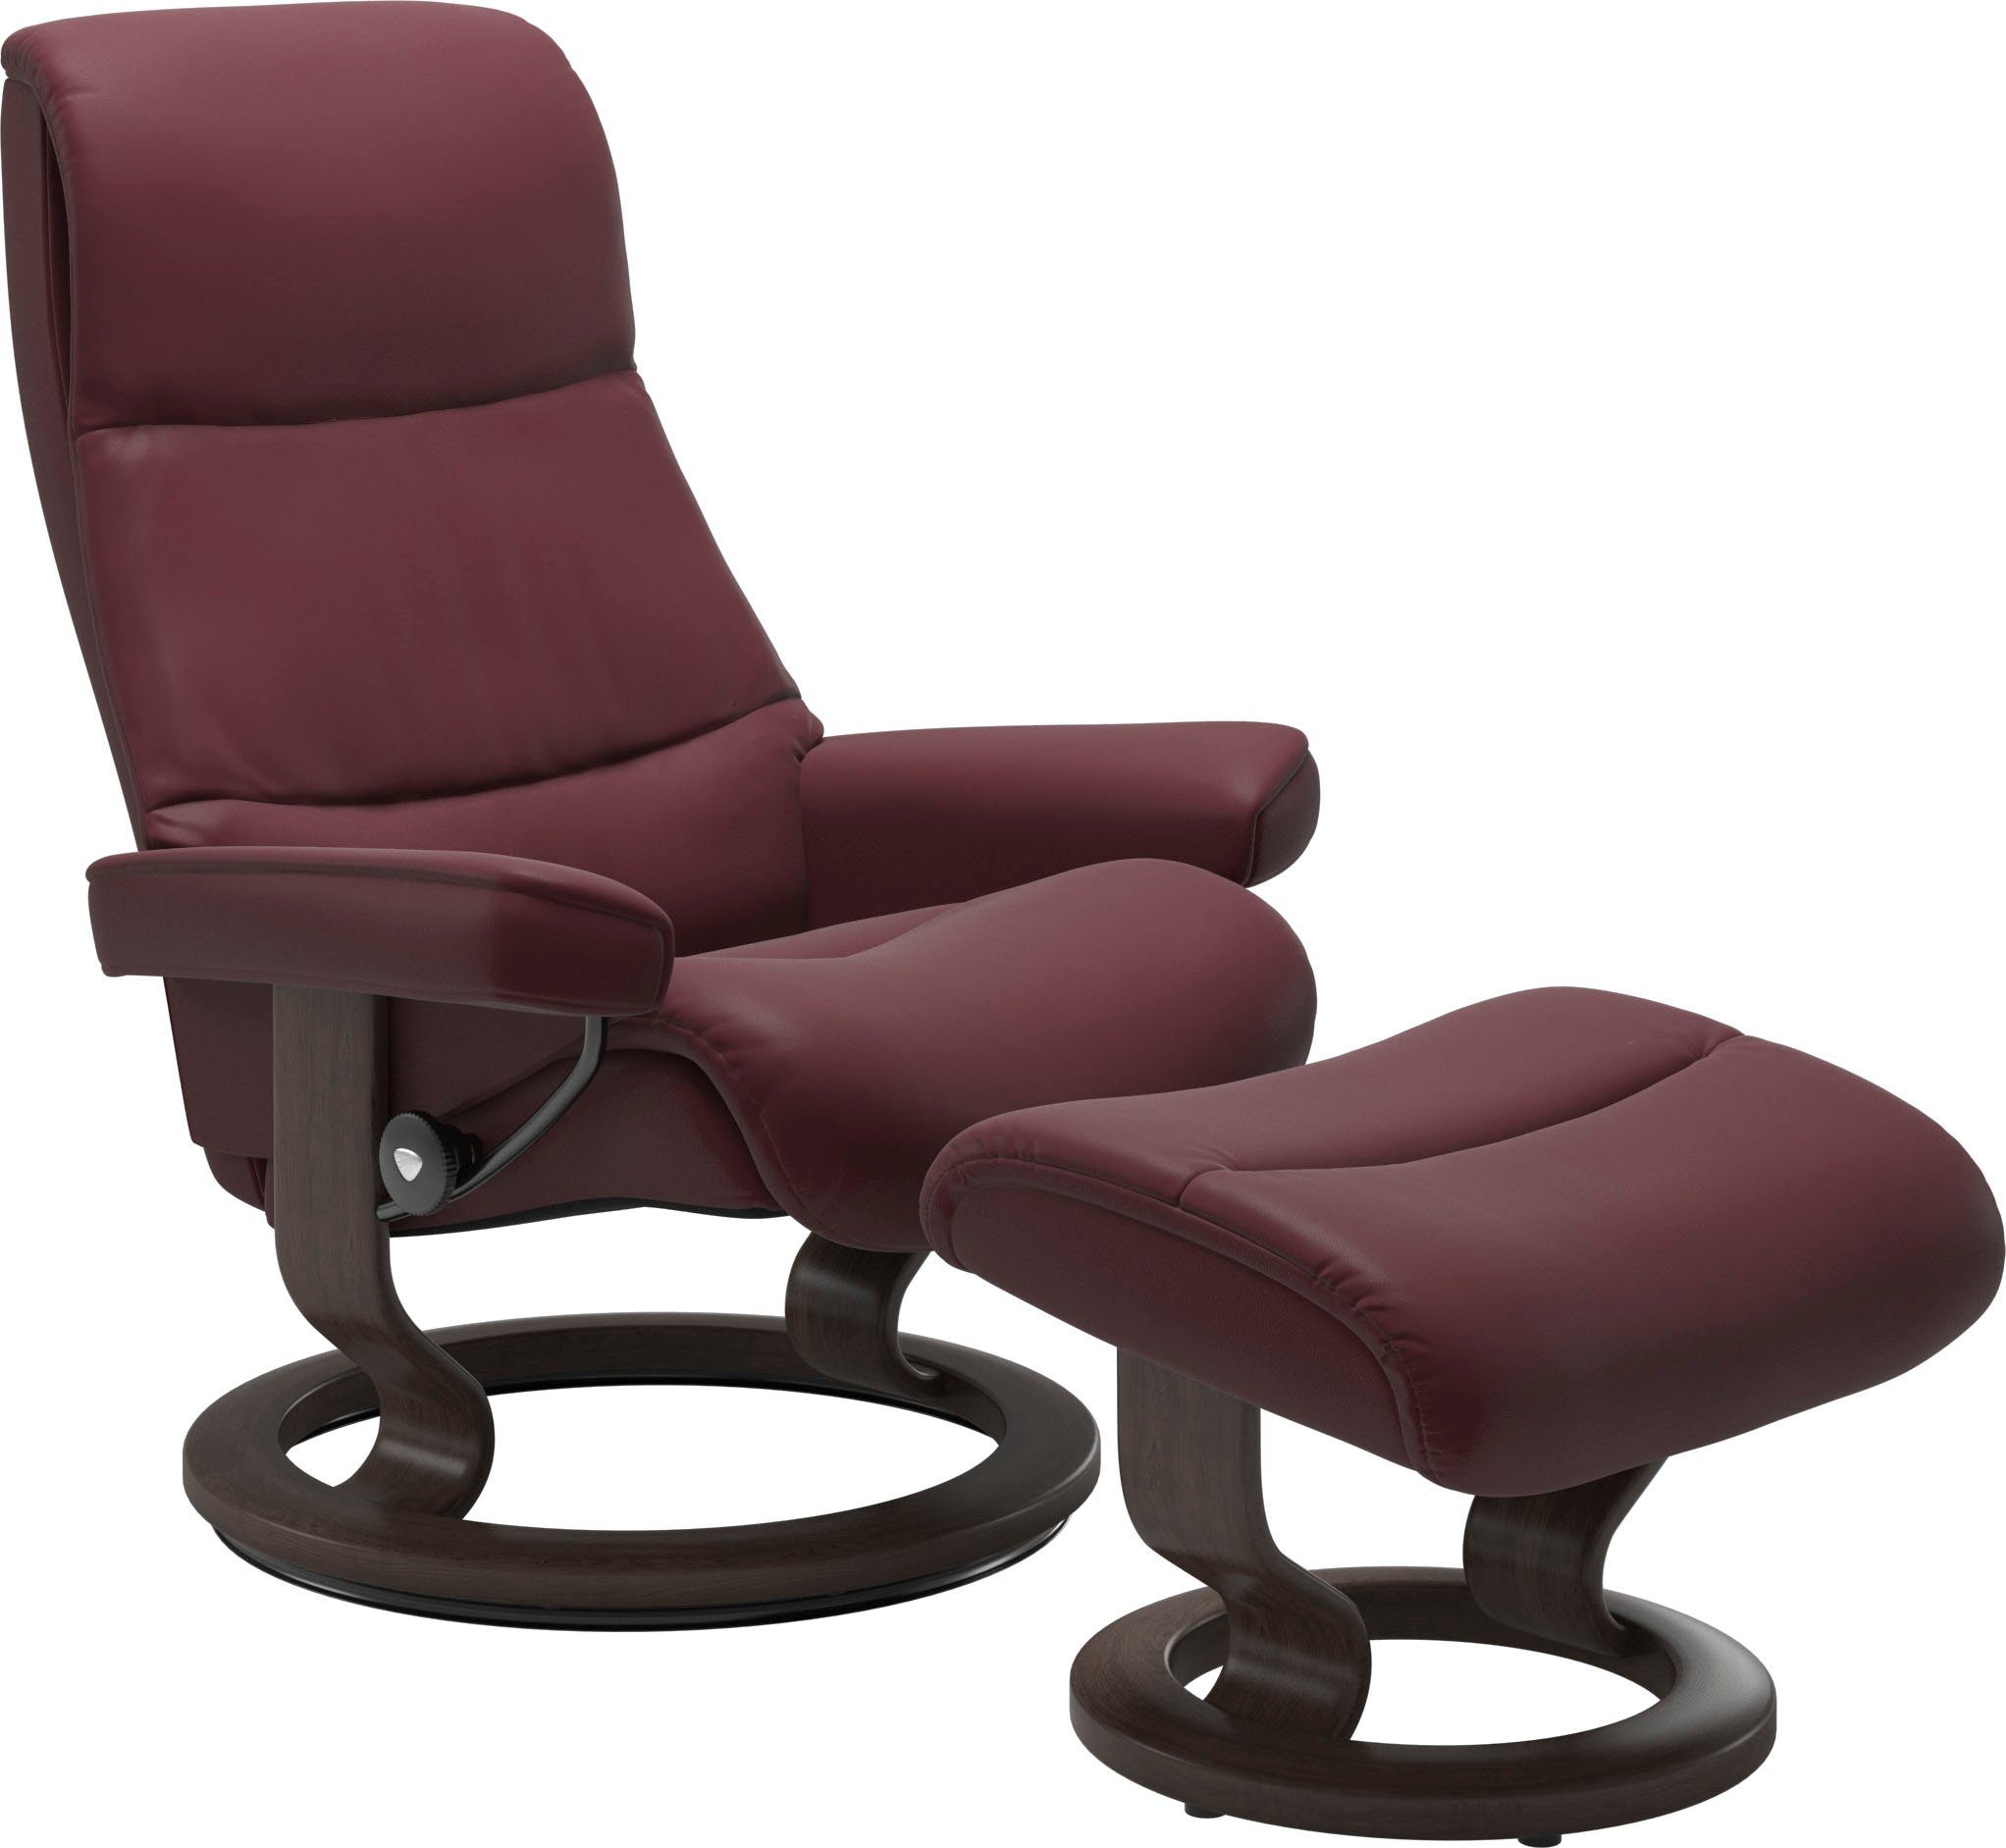 Classic Größe View, Wenge S,Gestell mit Base, Stressless® Relaxsessel